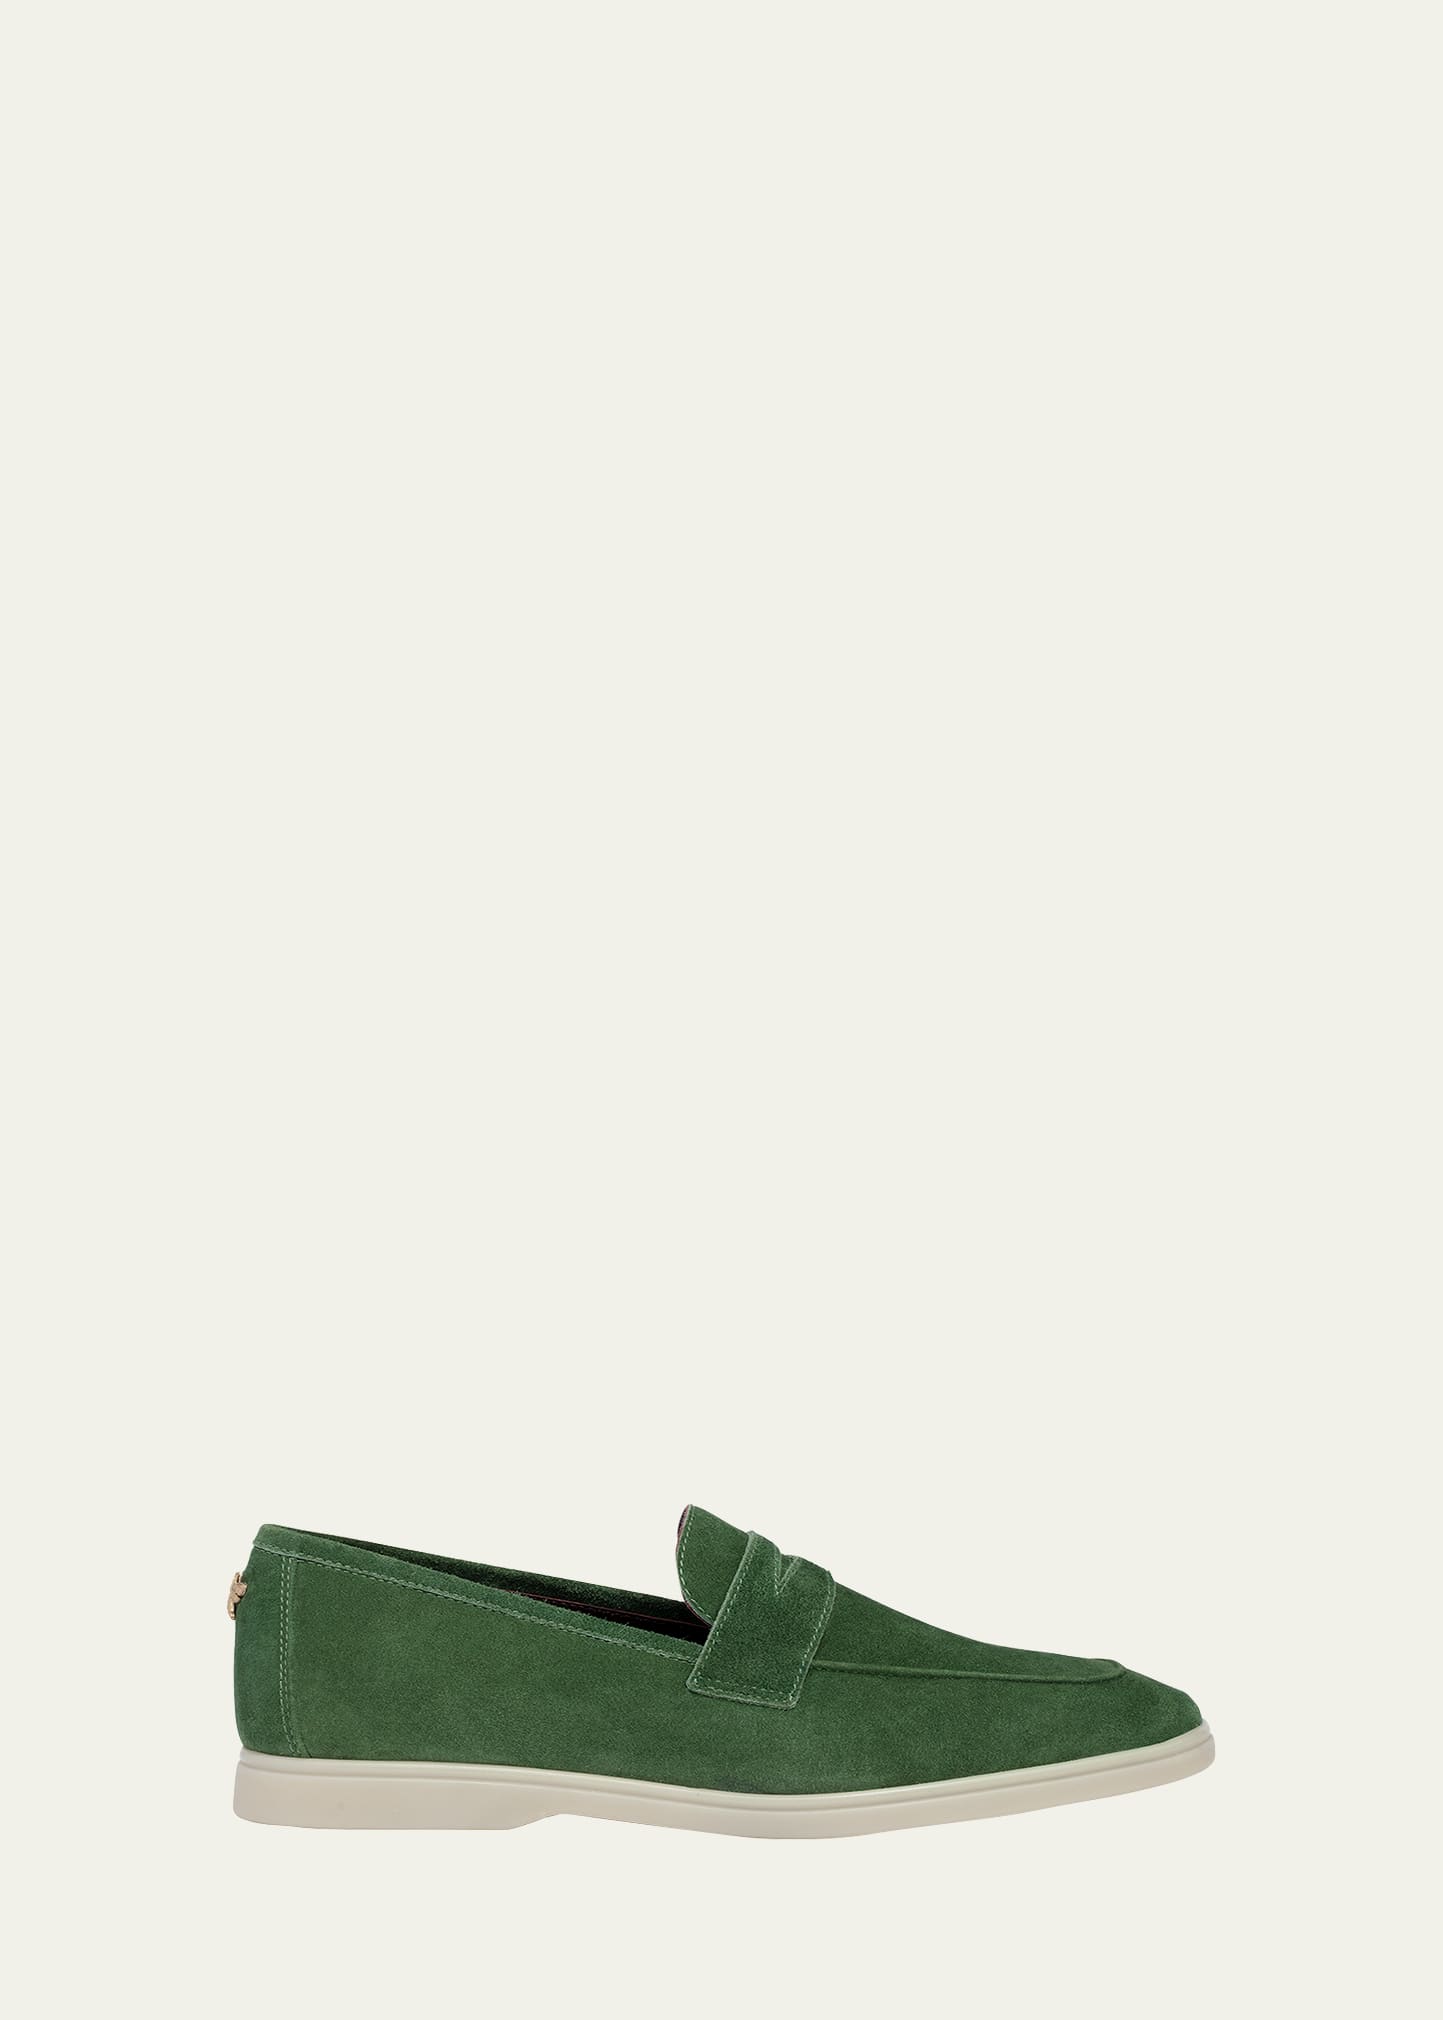 Bougeotte Gazon Suede Sporty Penny Loafers